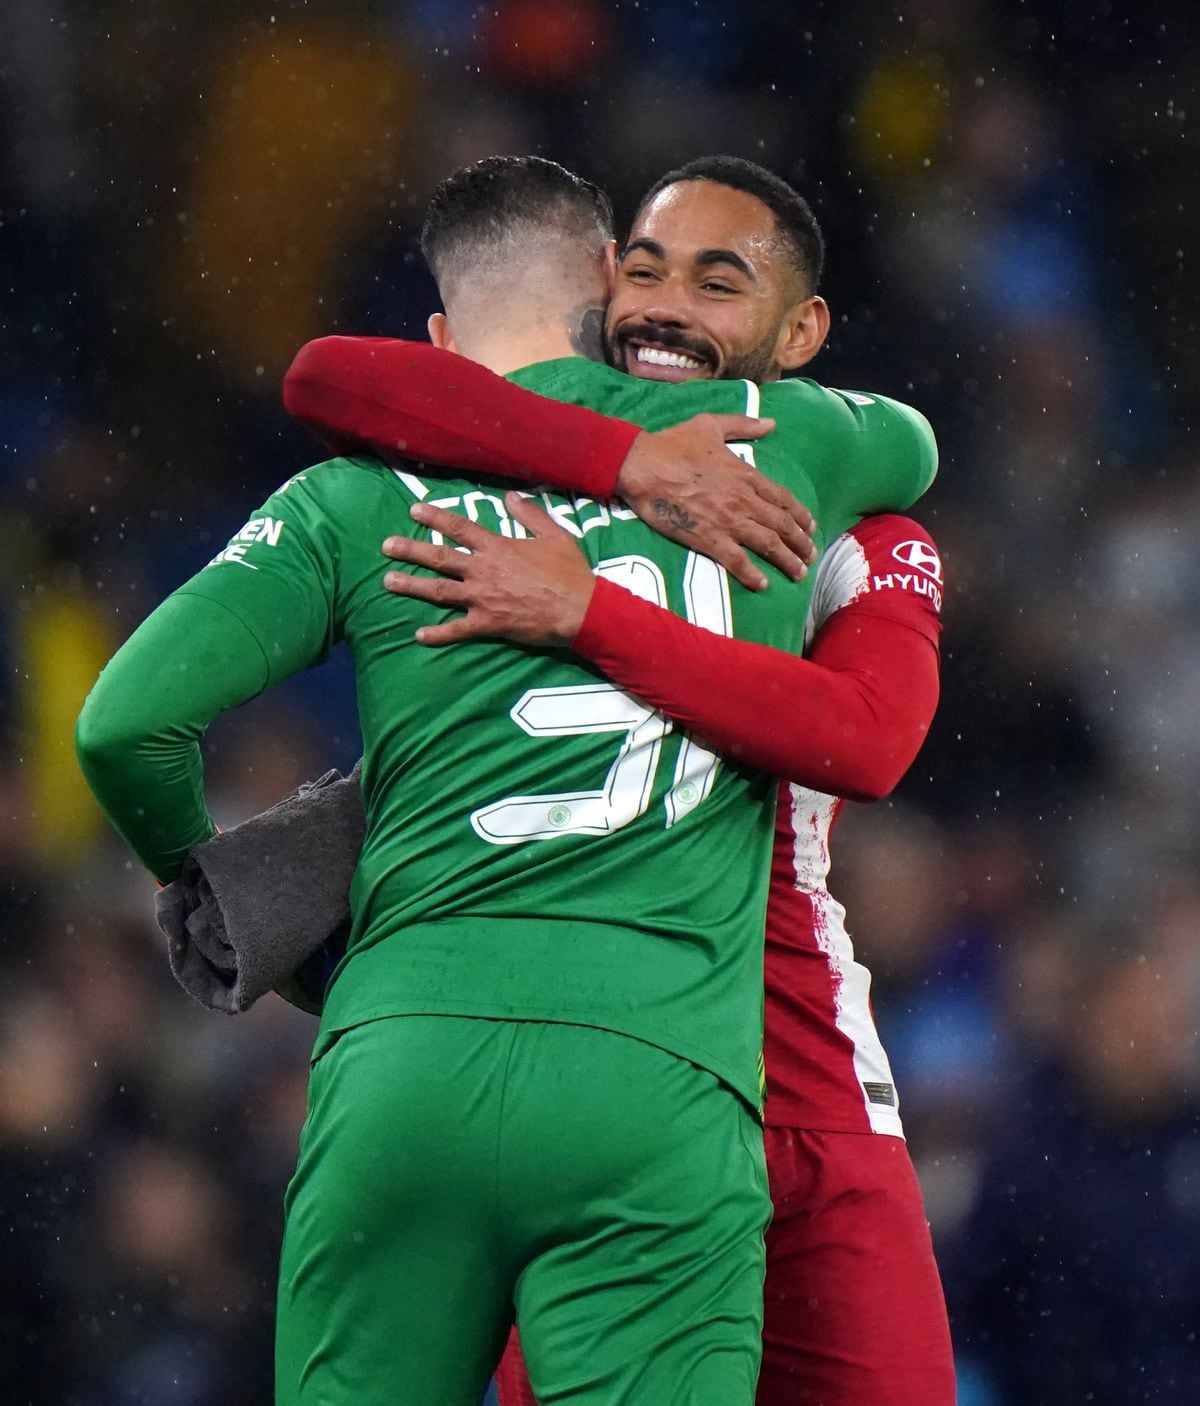 Manchester City goalkeeper Ederson (back to camera) and Atletico Madrid's Santos Matheus Cunha after the UEFA Champions League Quarter Final first leg match at the Etihad Stadium, Manchester. Picture date: Tuesday April 5, 2022..